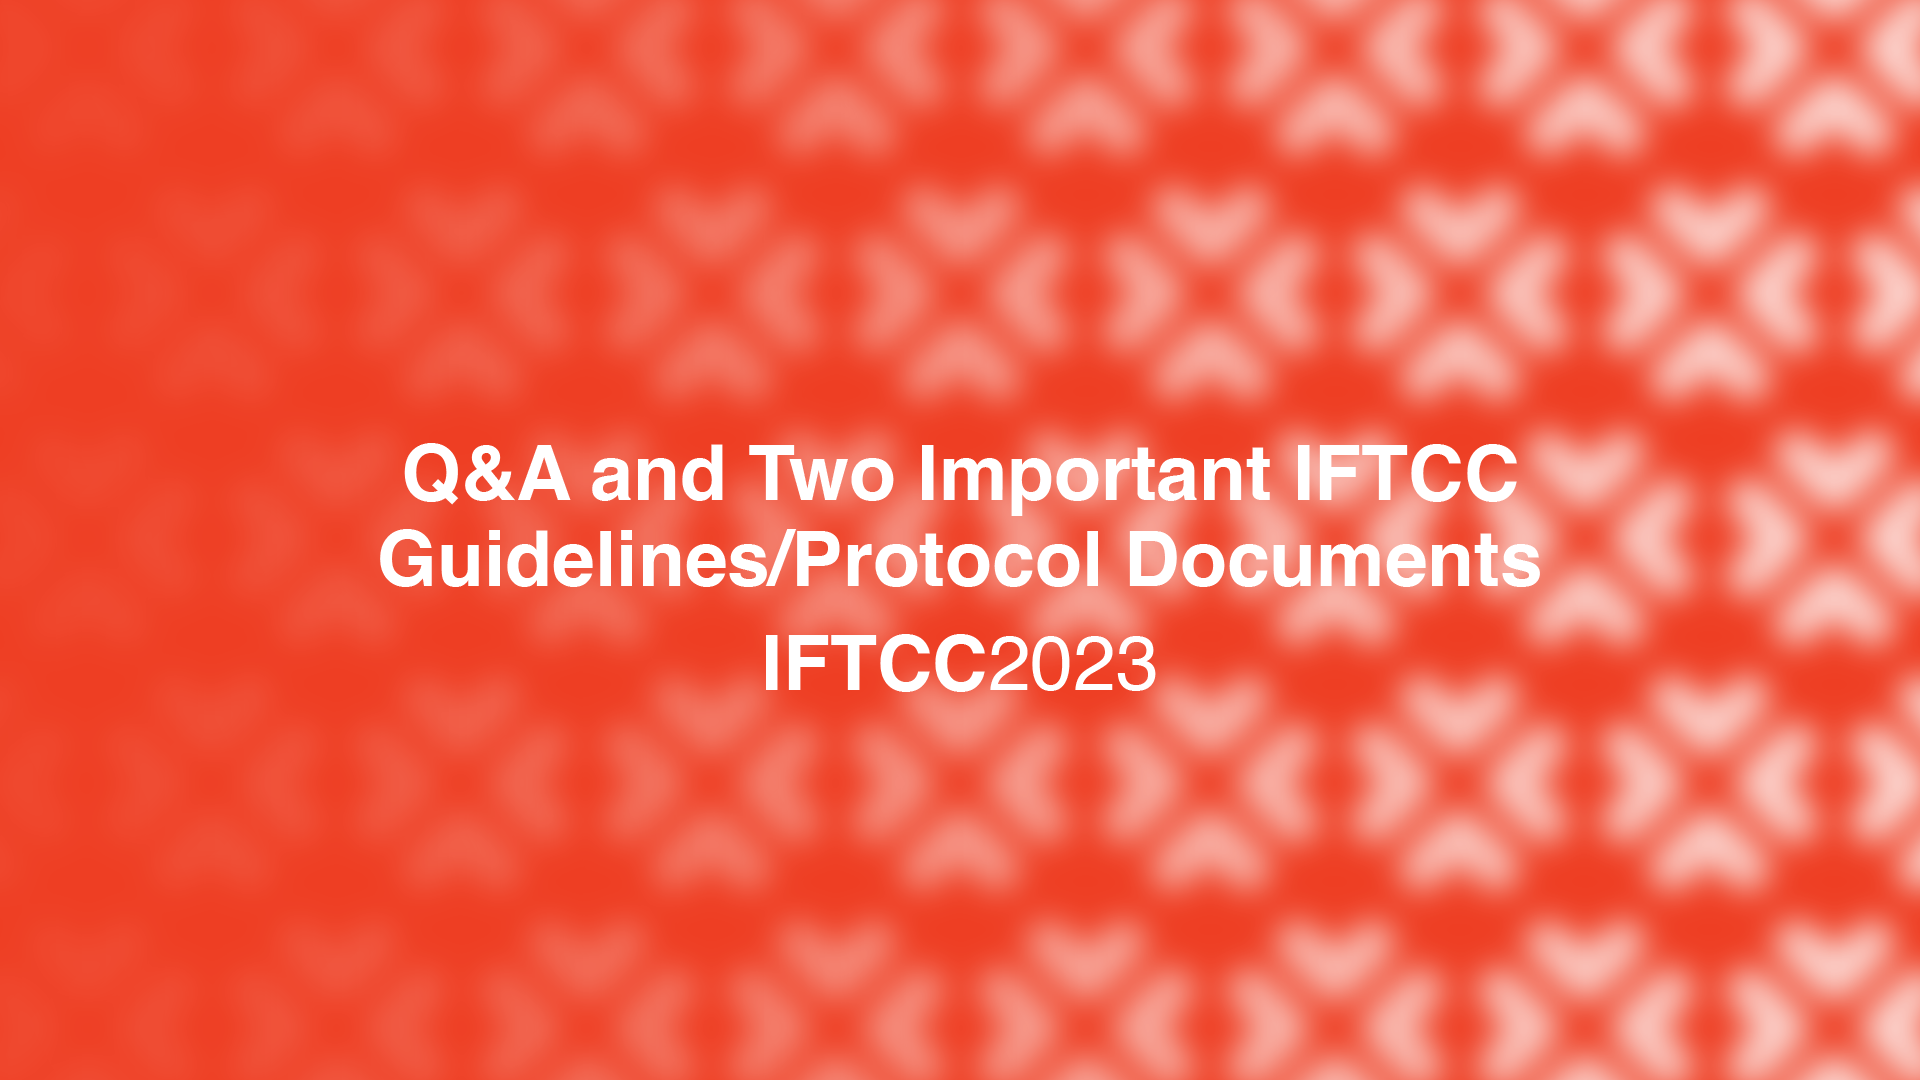 Session 5 – Q&A and Two Important IFTCC Guideline/Protocol Documents [S5-23-24]